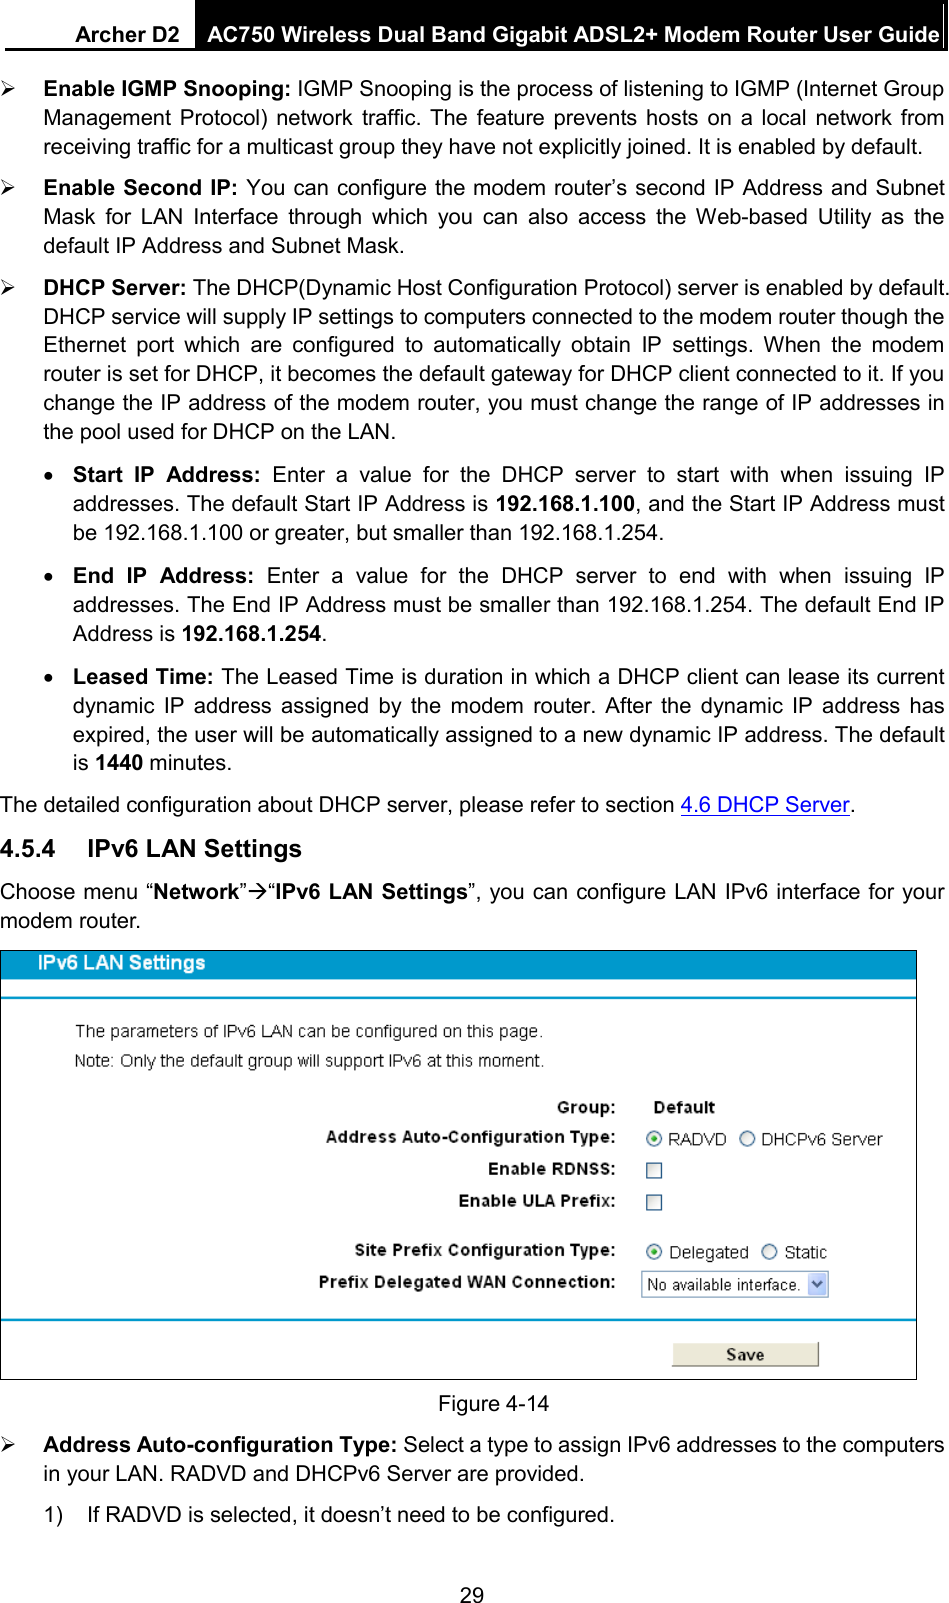 Archer D2 AC750 Wireless Dual Band Gigabit ADSL2+ Modem Router User Guide   Enable IGMP Snooping: IGMP Snooping is the process of listening to IGMP (Internet Group Management Protocol) network traffic. The feature prevents hosts on a local network from receiving traffic for a multicast group they have not explicitly joined. It is enabled by default.  Enable Second IP: You can configure the modem router’s second IP Address and Subnet Mask for LAN Interface through which you can also access the Web-based Utility as the default IP Address and Subnet Mask.  DHCP Server: The DHCP(Dynamic Host Configuration Protocol) server is enabled by default. DHCP service will supply IP settings to computers connected to the modem router though the Ethernet port which are configured to automatically obtain IP settings. When the modem router is set for DHCP, it becomes the default gateway for DHCP client connected to it. If you change the IP address of the modem router, you must change the range of IP addresses in the pool used for DHCP on the LAN. • Start IP Address: Enter a value for the DHCP server to start with when issuing IP addresses. The default Start IP Address is 192.168.1.100, and the Start IP Address must be 192.168.1.100 or greater, but smaller than 192.168.1.254. • End  IP Address: Enter a value for the DHCP server to end with when issuing IP addresses. The End IP Address must be smaller than 192.168.1.254. The default End IP Address is 192.168.1.254. • Leased Time: The Leased Time is duration in which a DHCP client can lease its current dynamic IP address assigned by the modem router. After the dynamic IP address has expired, the user will be automatically assigned to a new dynamic IP address. The default is 1440 minutes. The detailed configuration about DHCP server, please refer to section 4.6 DHCP Server. 4.5.4 IPv6 LAN Settings Choose menu “Network”“IPv6 LAN Settings”, you can configure LAN IPv6 interface for your modem router.  Figure 4-14  Address Auto-configuration Type: Select a type to assign IPv6 addresses to the computers in your LAN. RADVD and DHCPv6 Server are provided. 1) If RADVD is selected, it doesn’t need to be configured. 29 